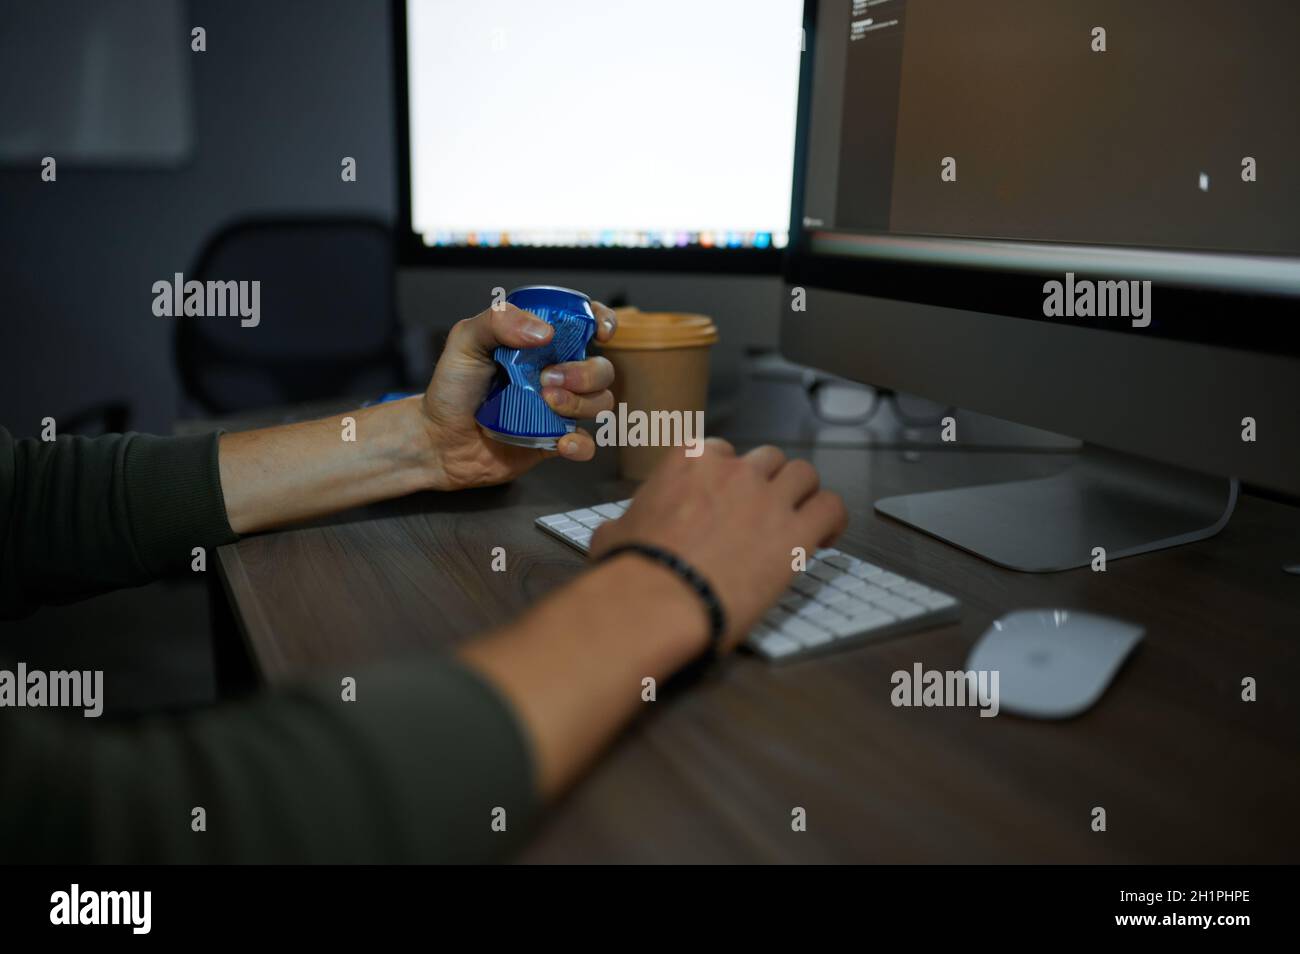 Male internet hacker eats at monitor in dark office. Illegal web programmer at workplace, criminal occupation. Data hacking, cyber security Stock Photo